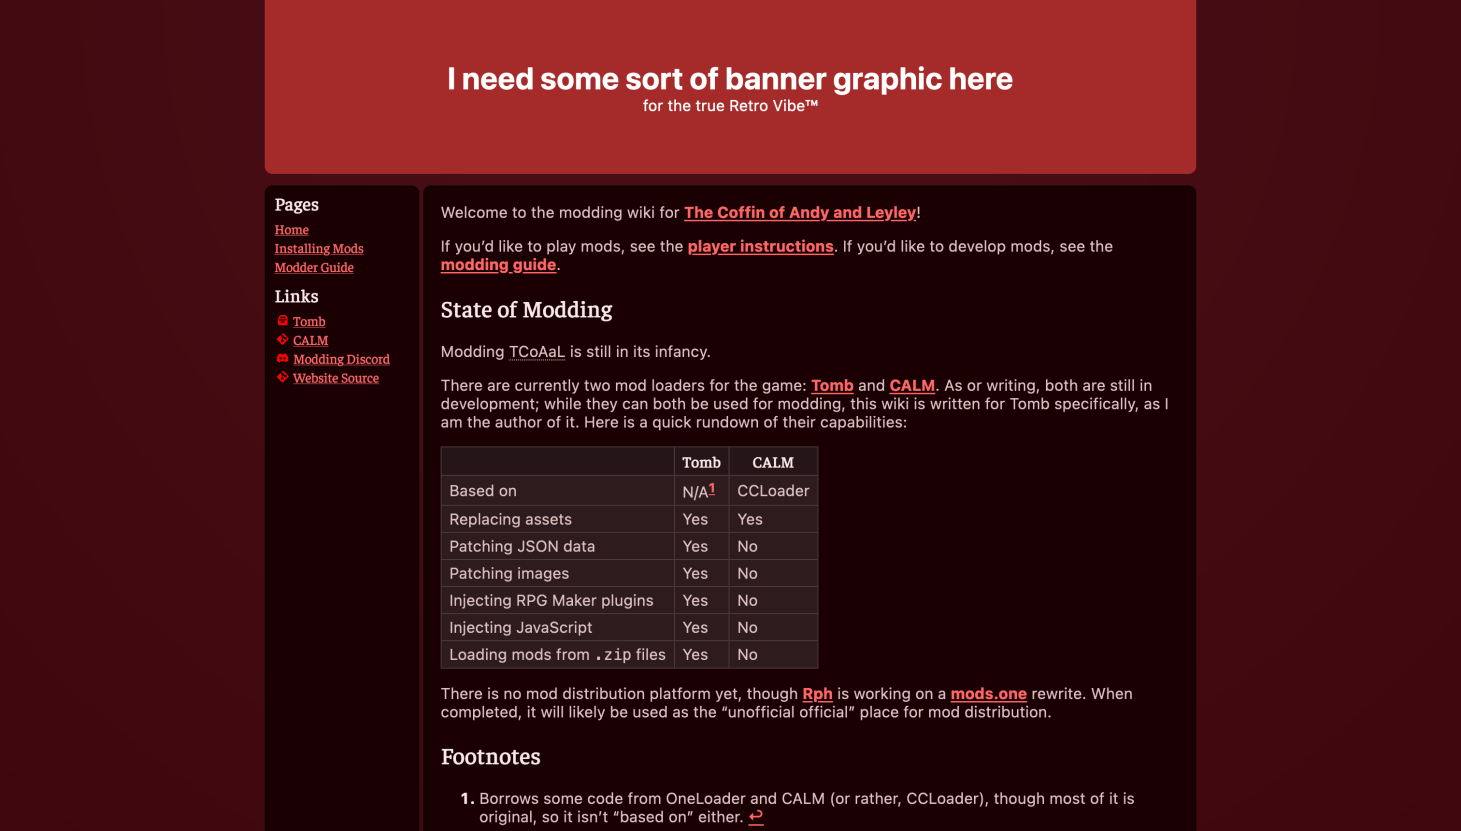 A basic website with a dark red background, a very dark red container for the body, a navigational sidebar, and a big placeholder banner. The content is centered into a central pillar, with padding on both sides. It looks quite flat and plain.